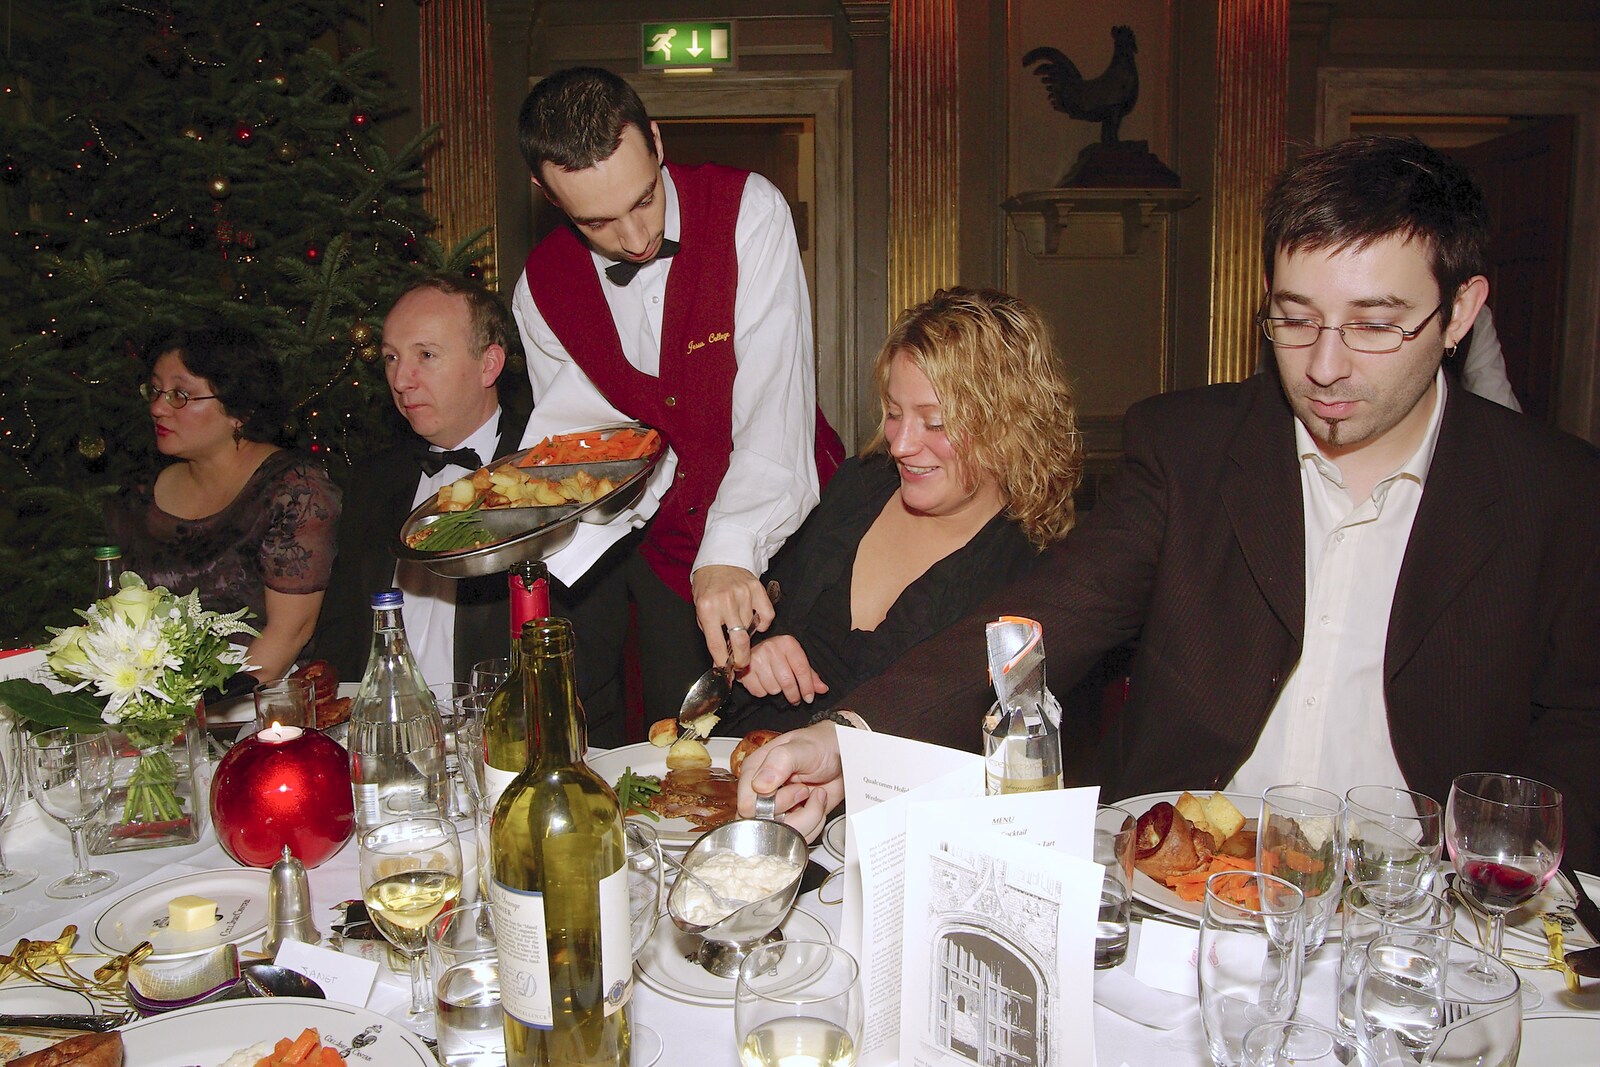 Dinner is served from Qualcomm Cambridge's Christmas Do, Jesus College, Cambridge - 20th December 2006